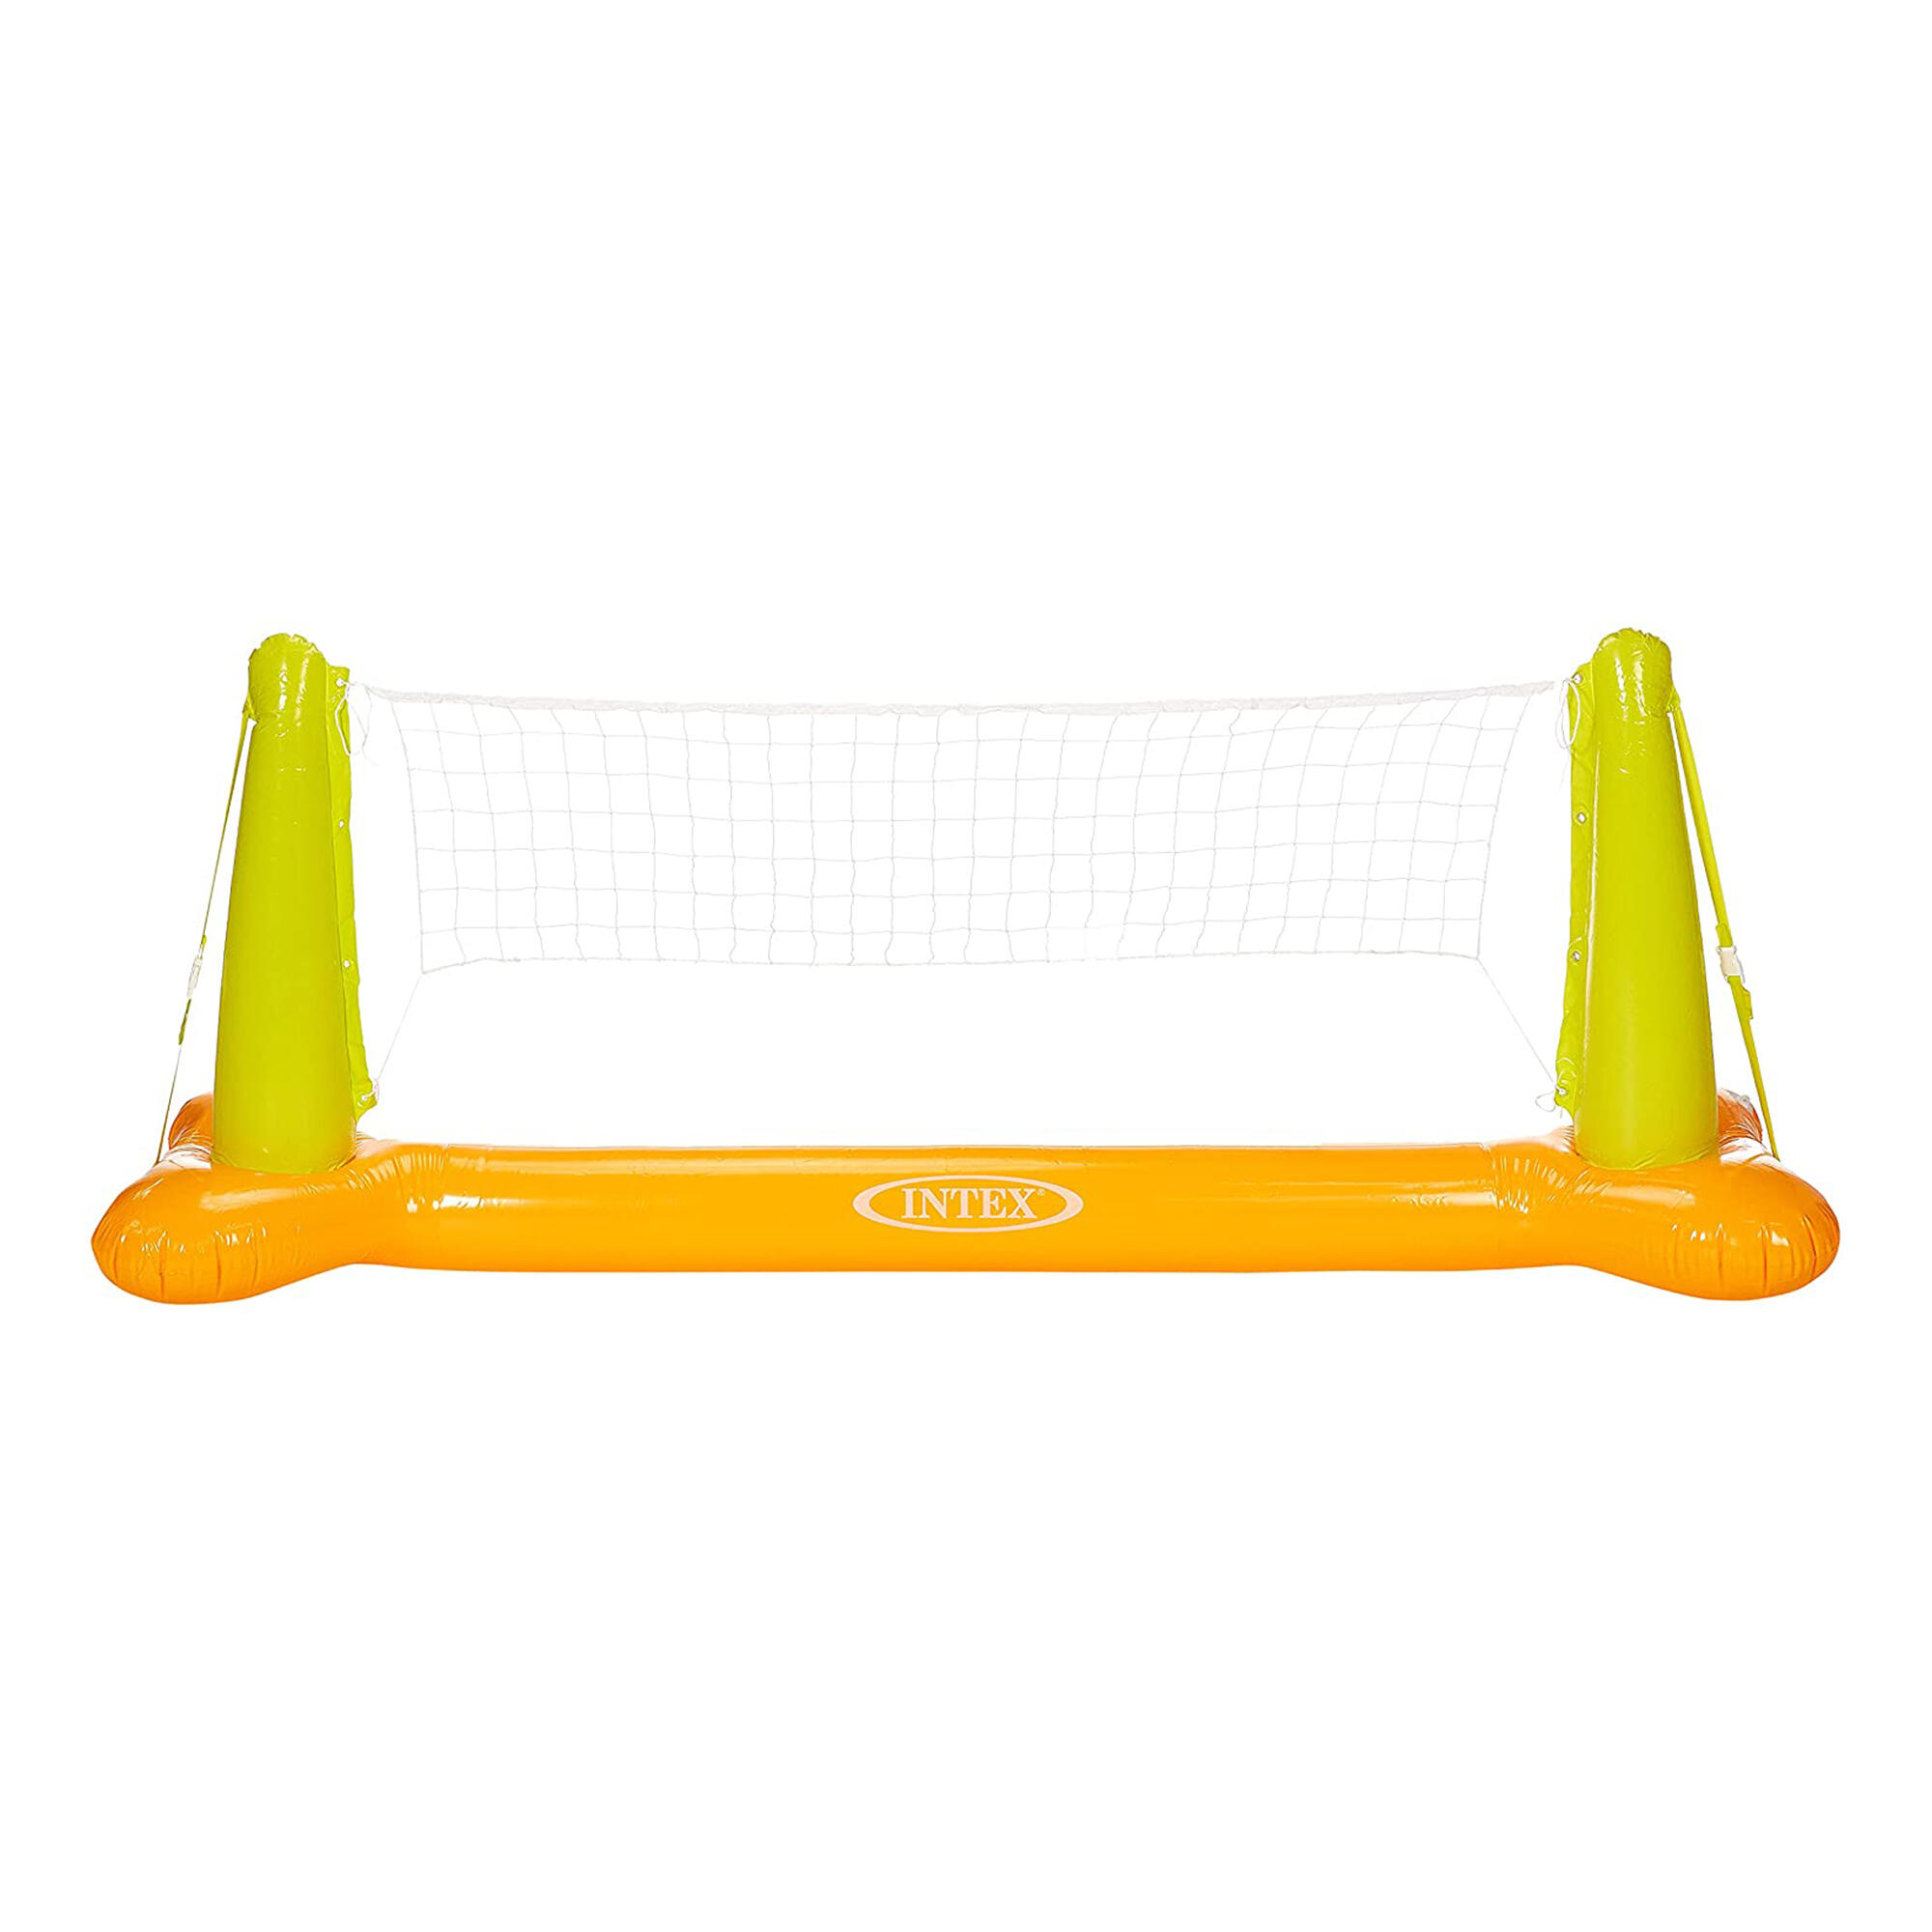 INFLATABLE POOL VOLLEYBALL NET INTEX 2/4